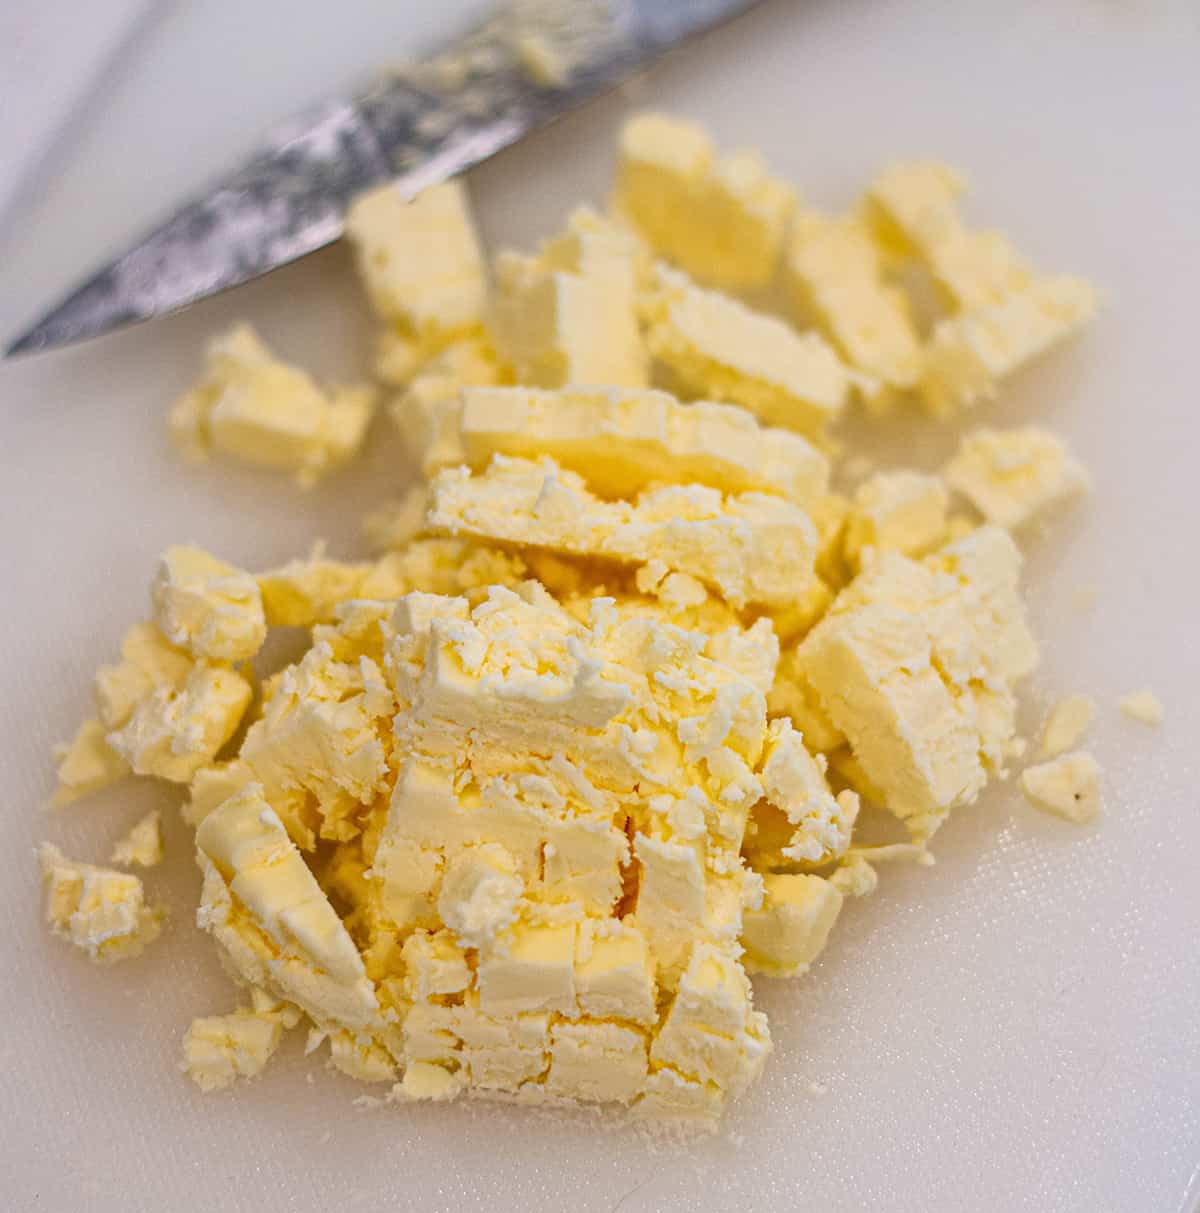 Butter cut into small cubes.